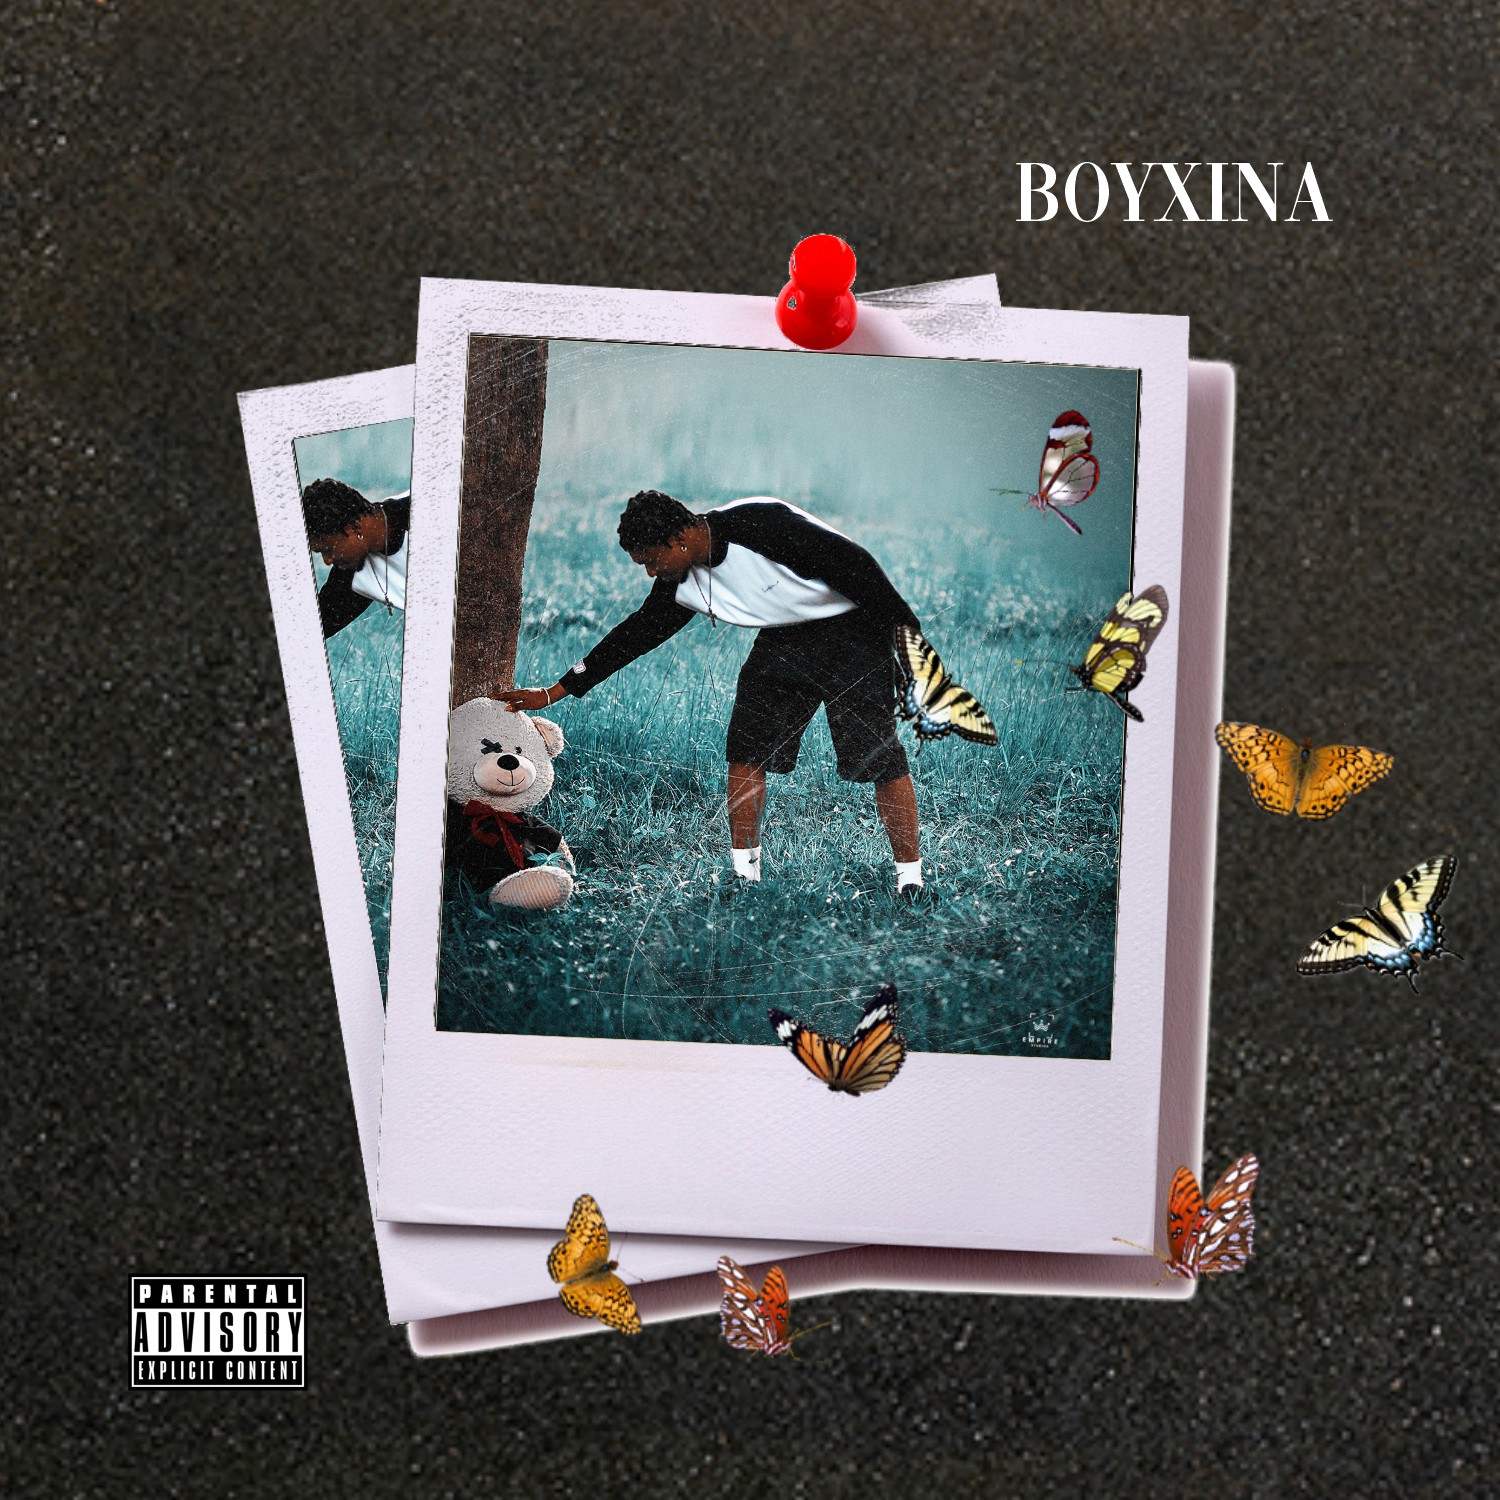 [MUSIC] BOYXINA – LET ME KNOW